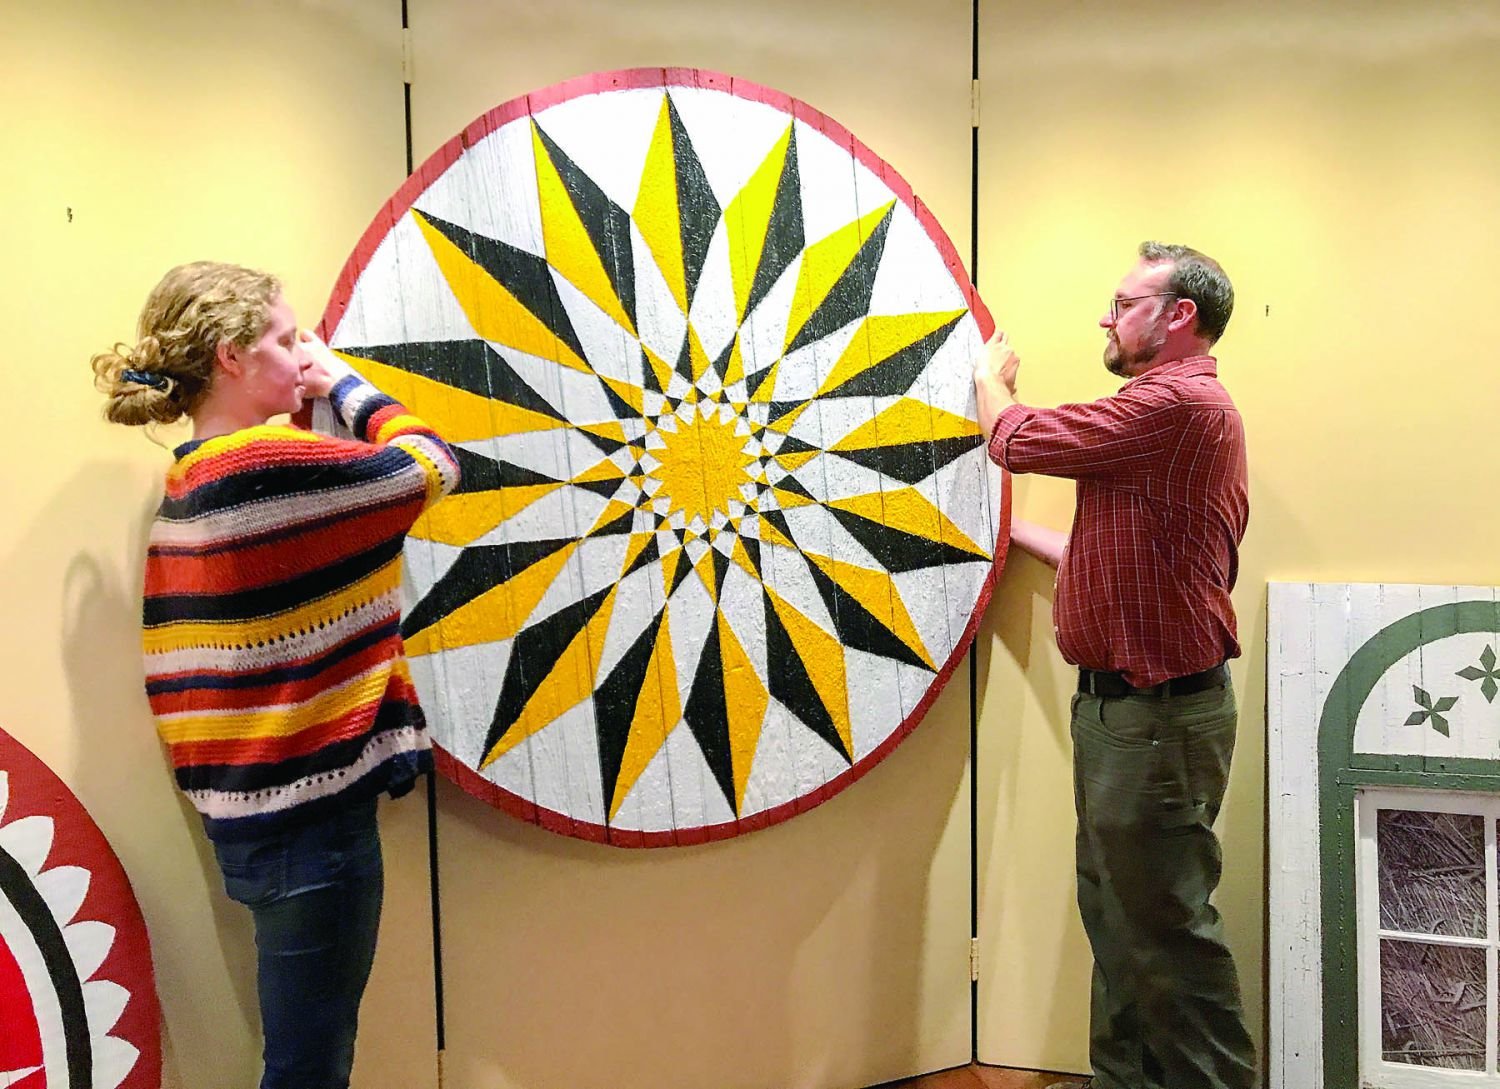 Patrick Donmoyer, guest curator, and student Sarah Edris plan the installation of a large barn star, which Edris restored under Donmoyer’s supervision.